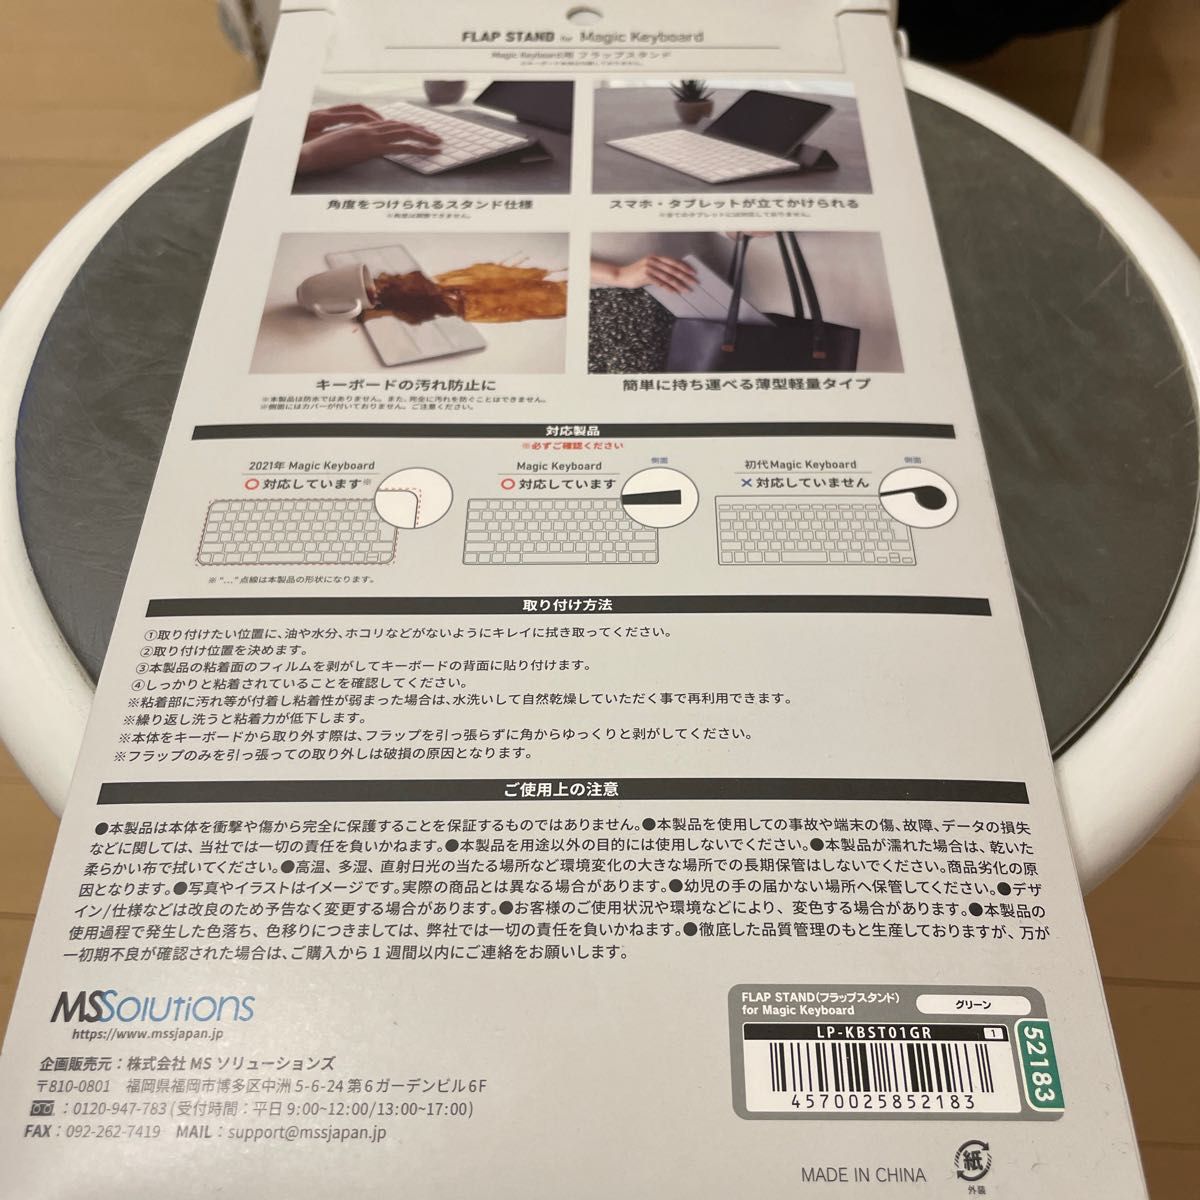 ＬＥＰＬＵＳ FLAP STAND フラップスタンド for Magic Keyboard イエロー(LP-KBST01YE) 取り寄せ商品